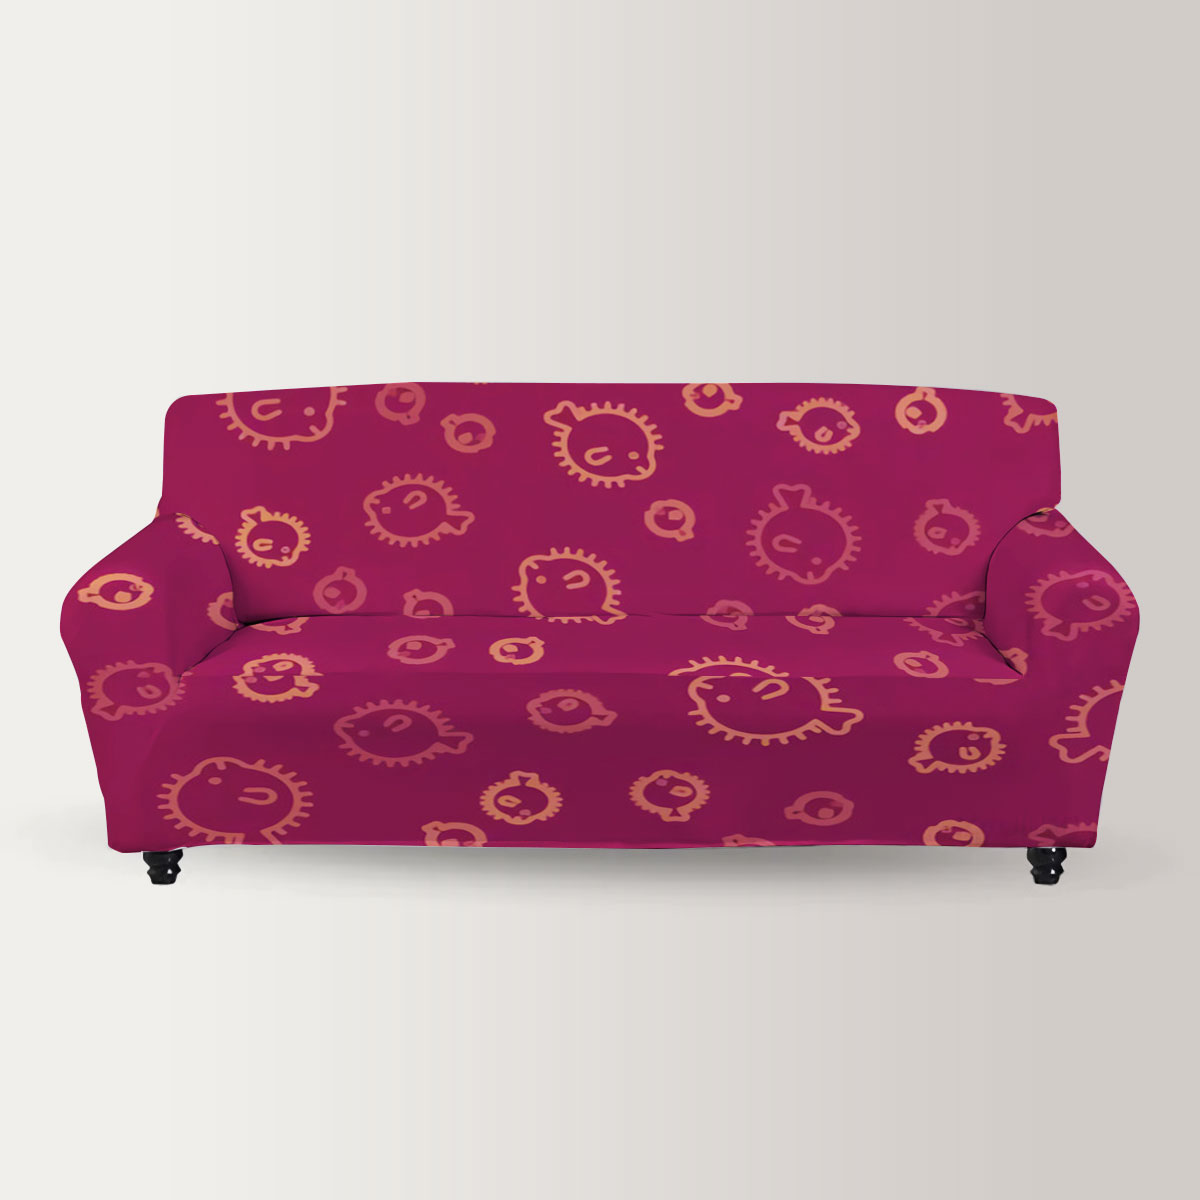 Funny Red Puffer Fish Sofa Cover